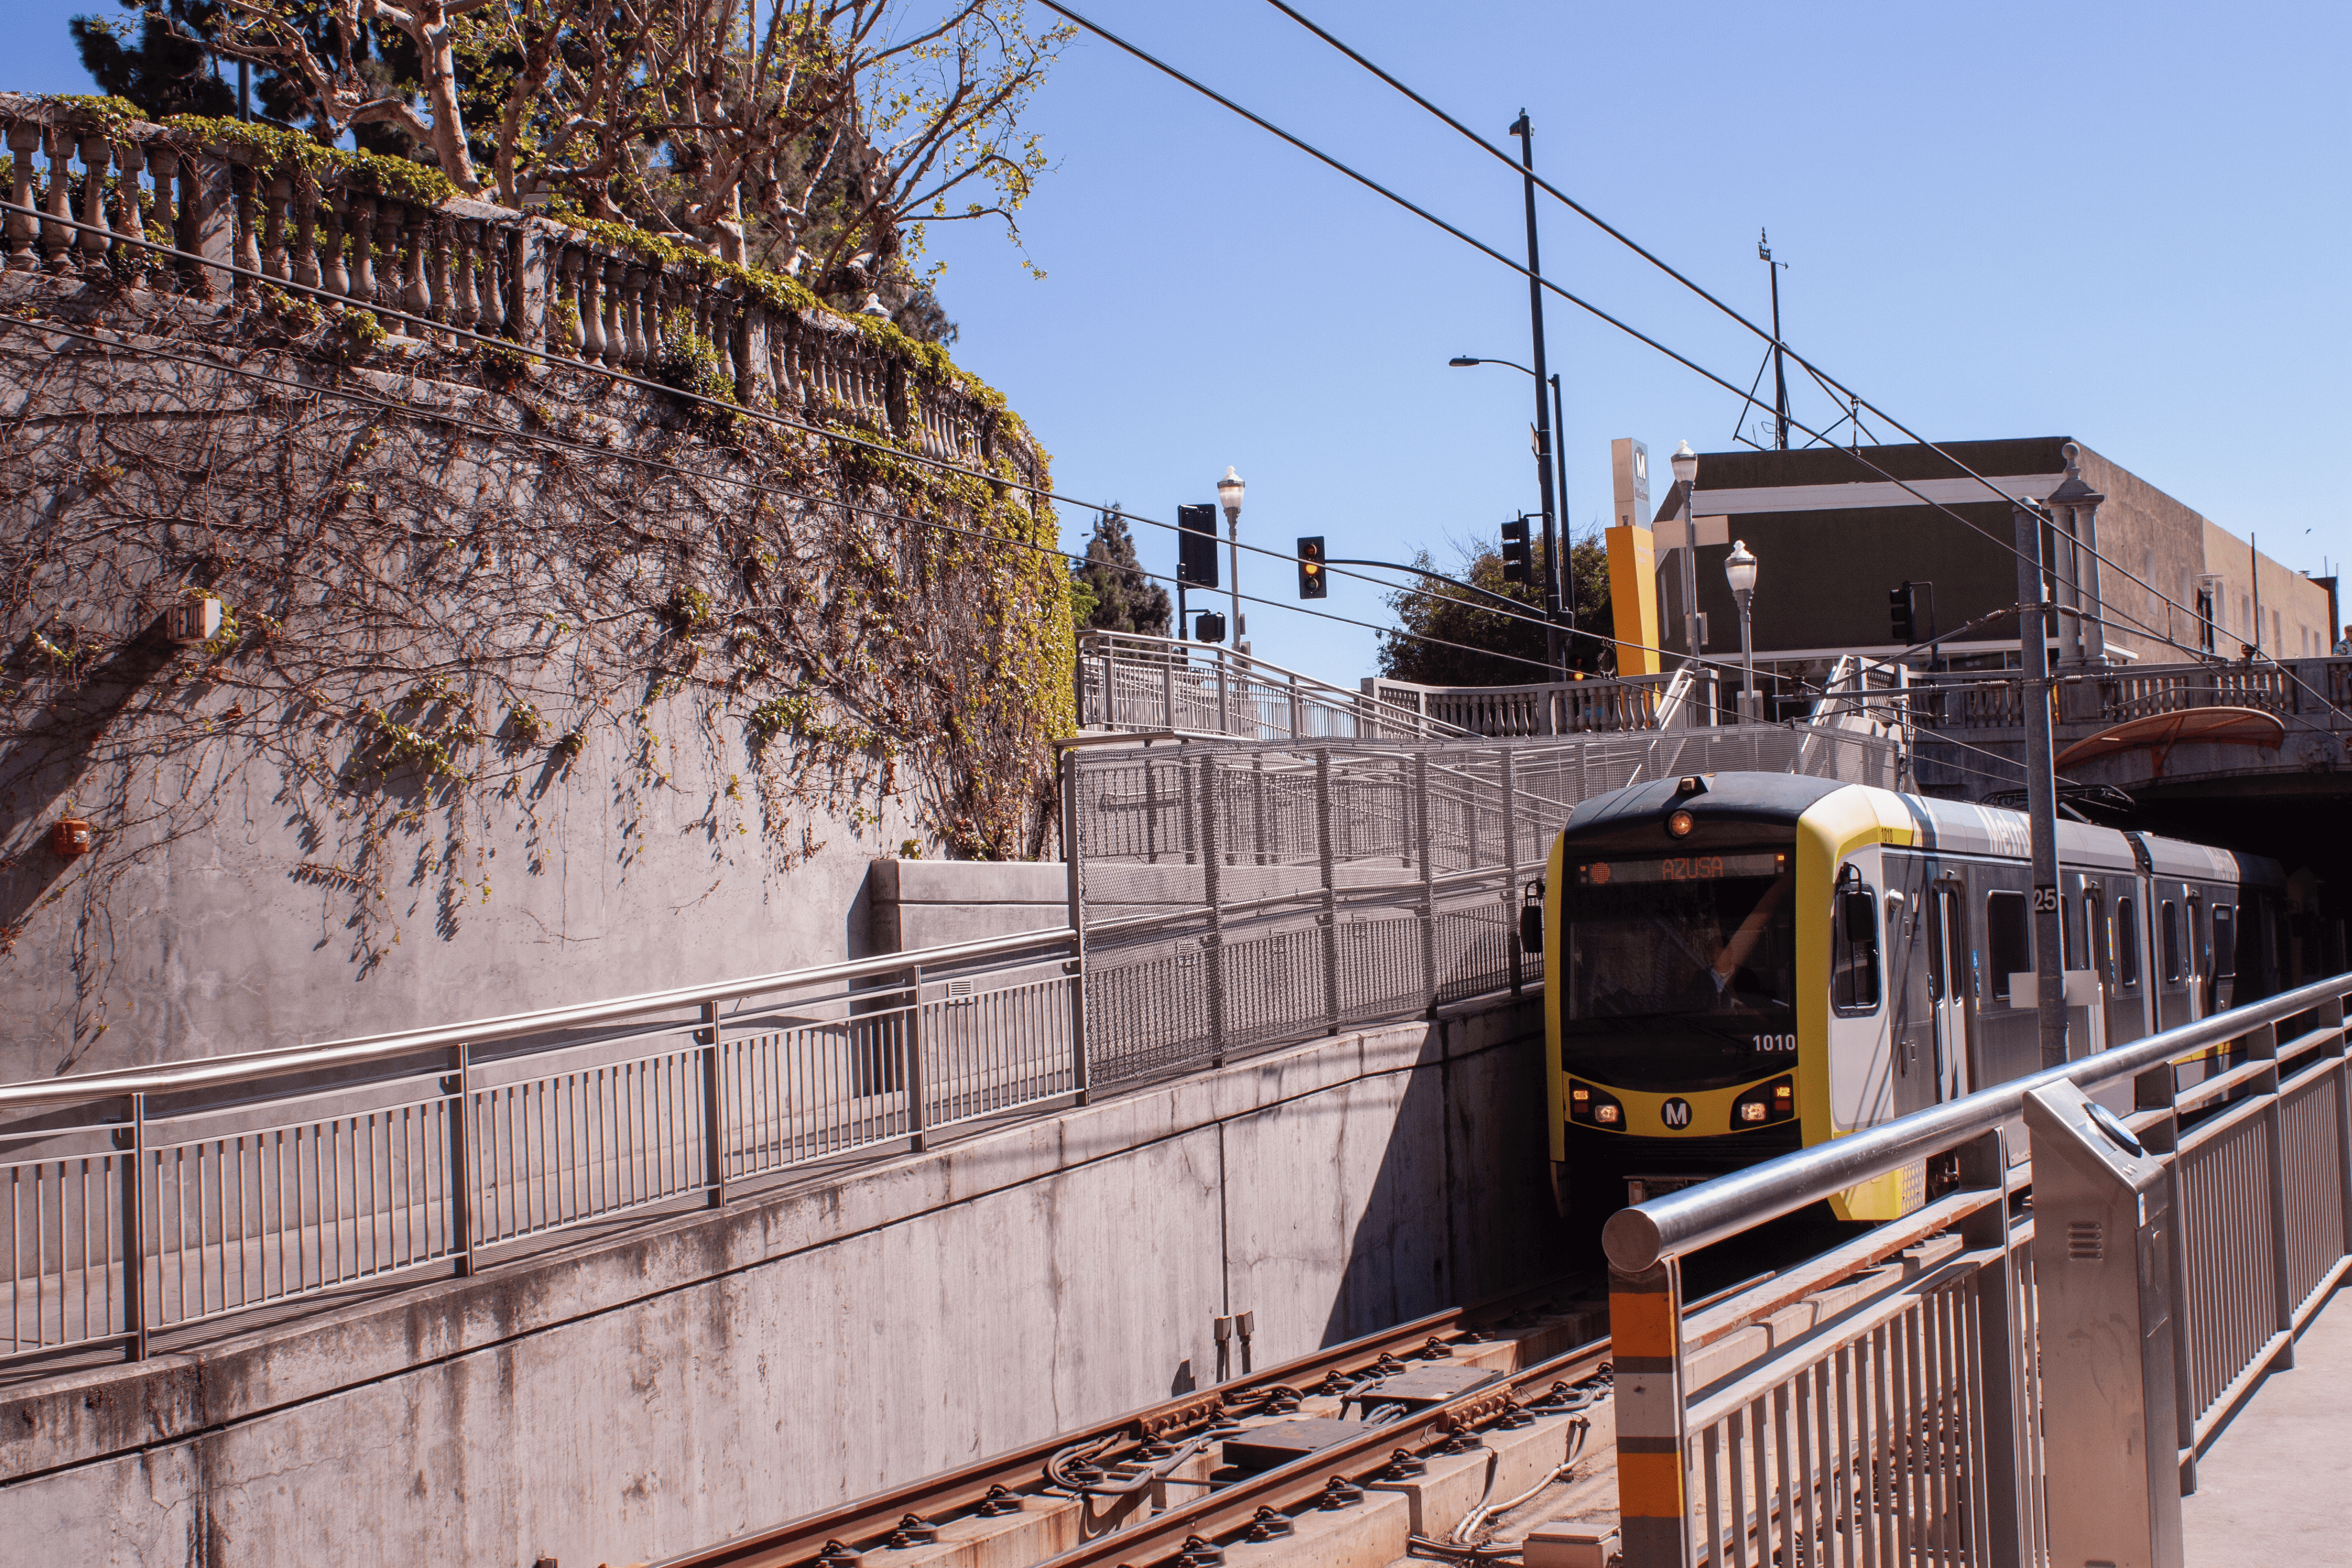 A yellow train pulls into a fairly gray and concrete station from inside a tunnel. Vines creep up one wall of the station, and a bright blue sky is visible behind it all.